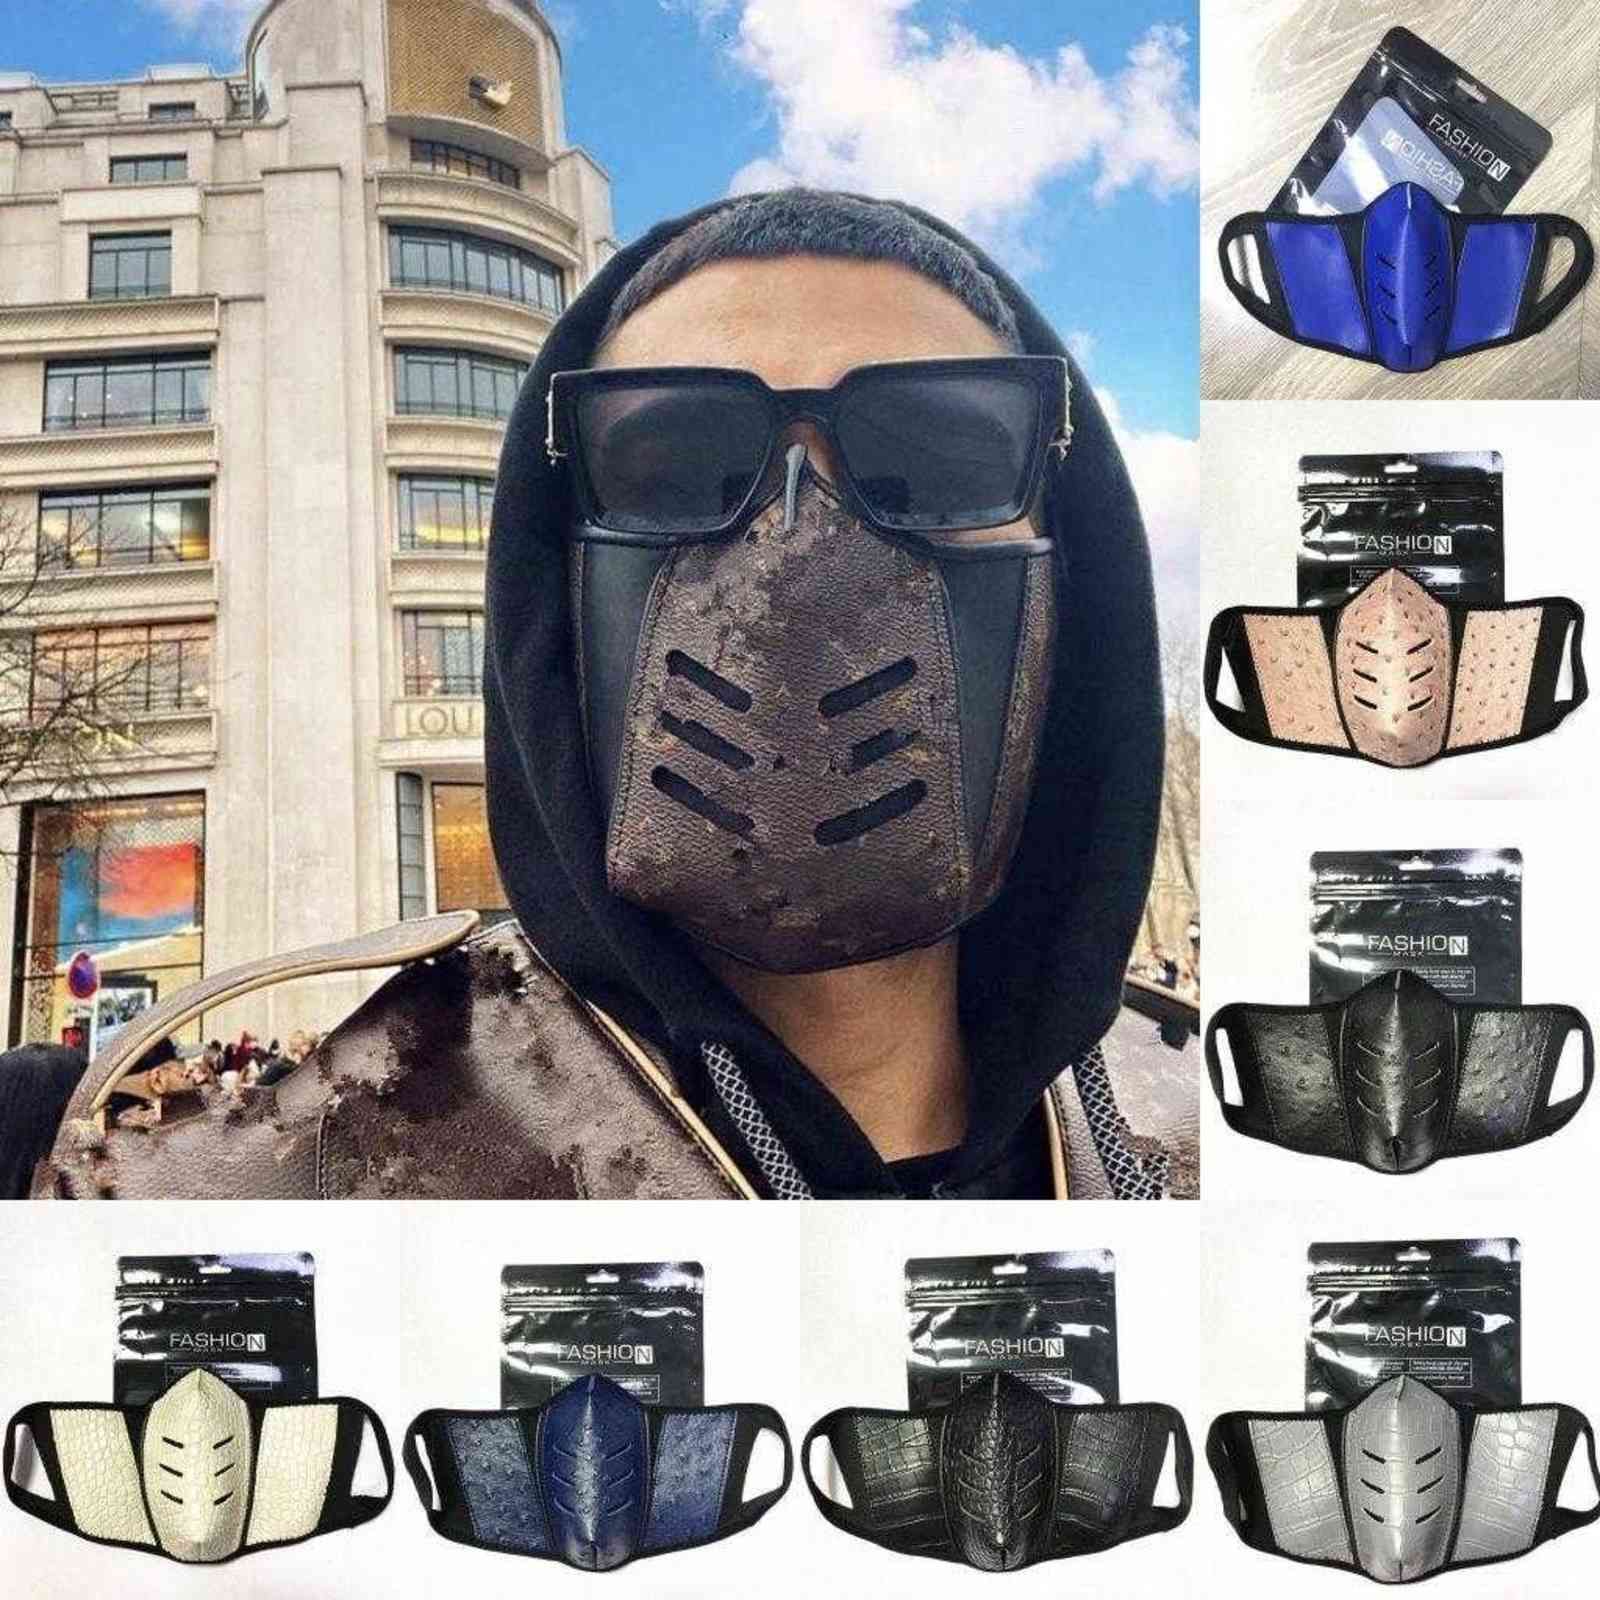 Anniv Coupon Below] Us Stock Unisex Face Masks Covers Pu Leather Men Women  Dustproof Fashion Mouth Muffle Washable Outdoor Sports Protective ME5B From  Outletdh, $8.84